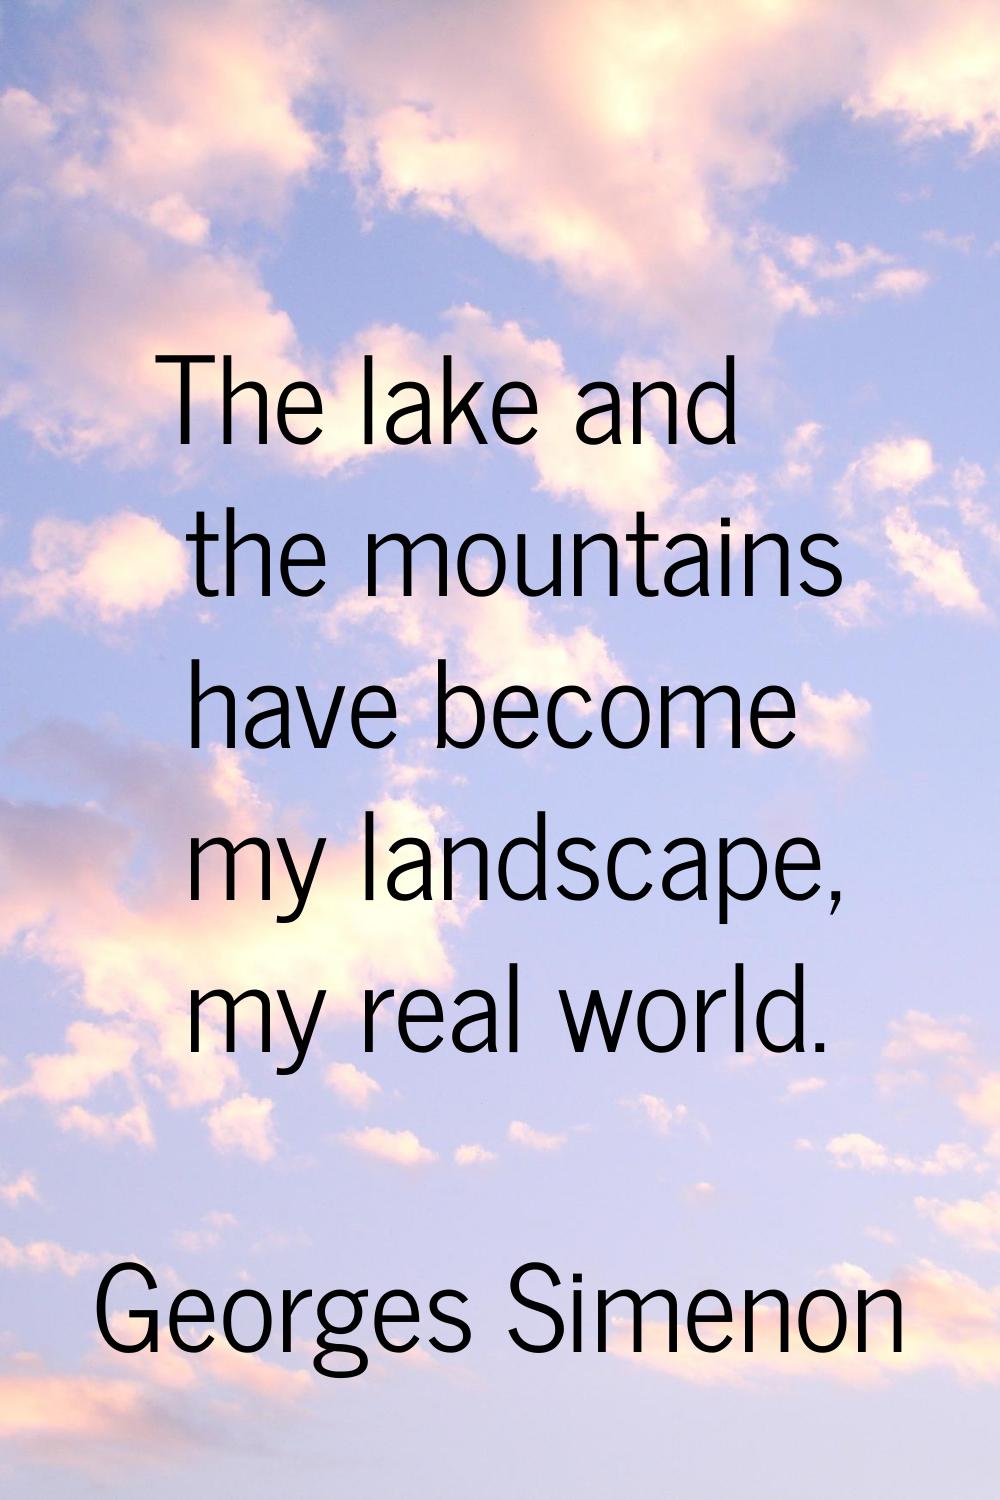 The lake and the mountains have become my landscape, my real world.